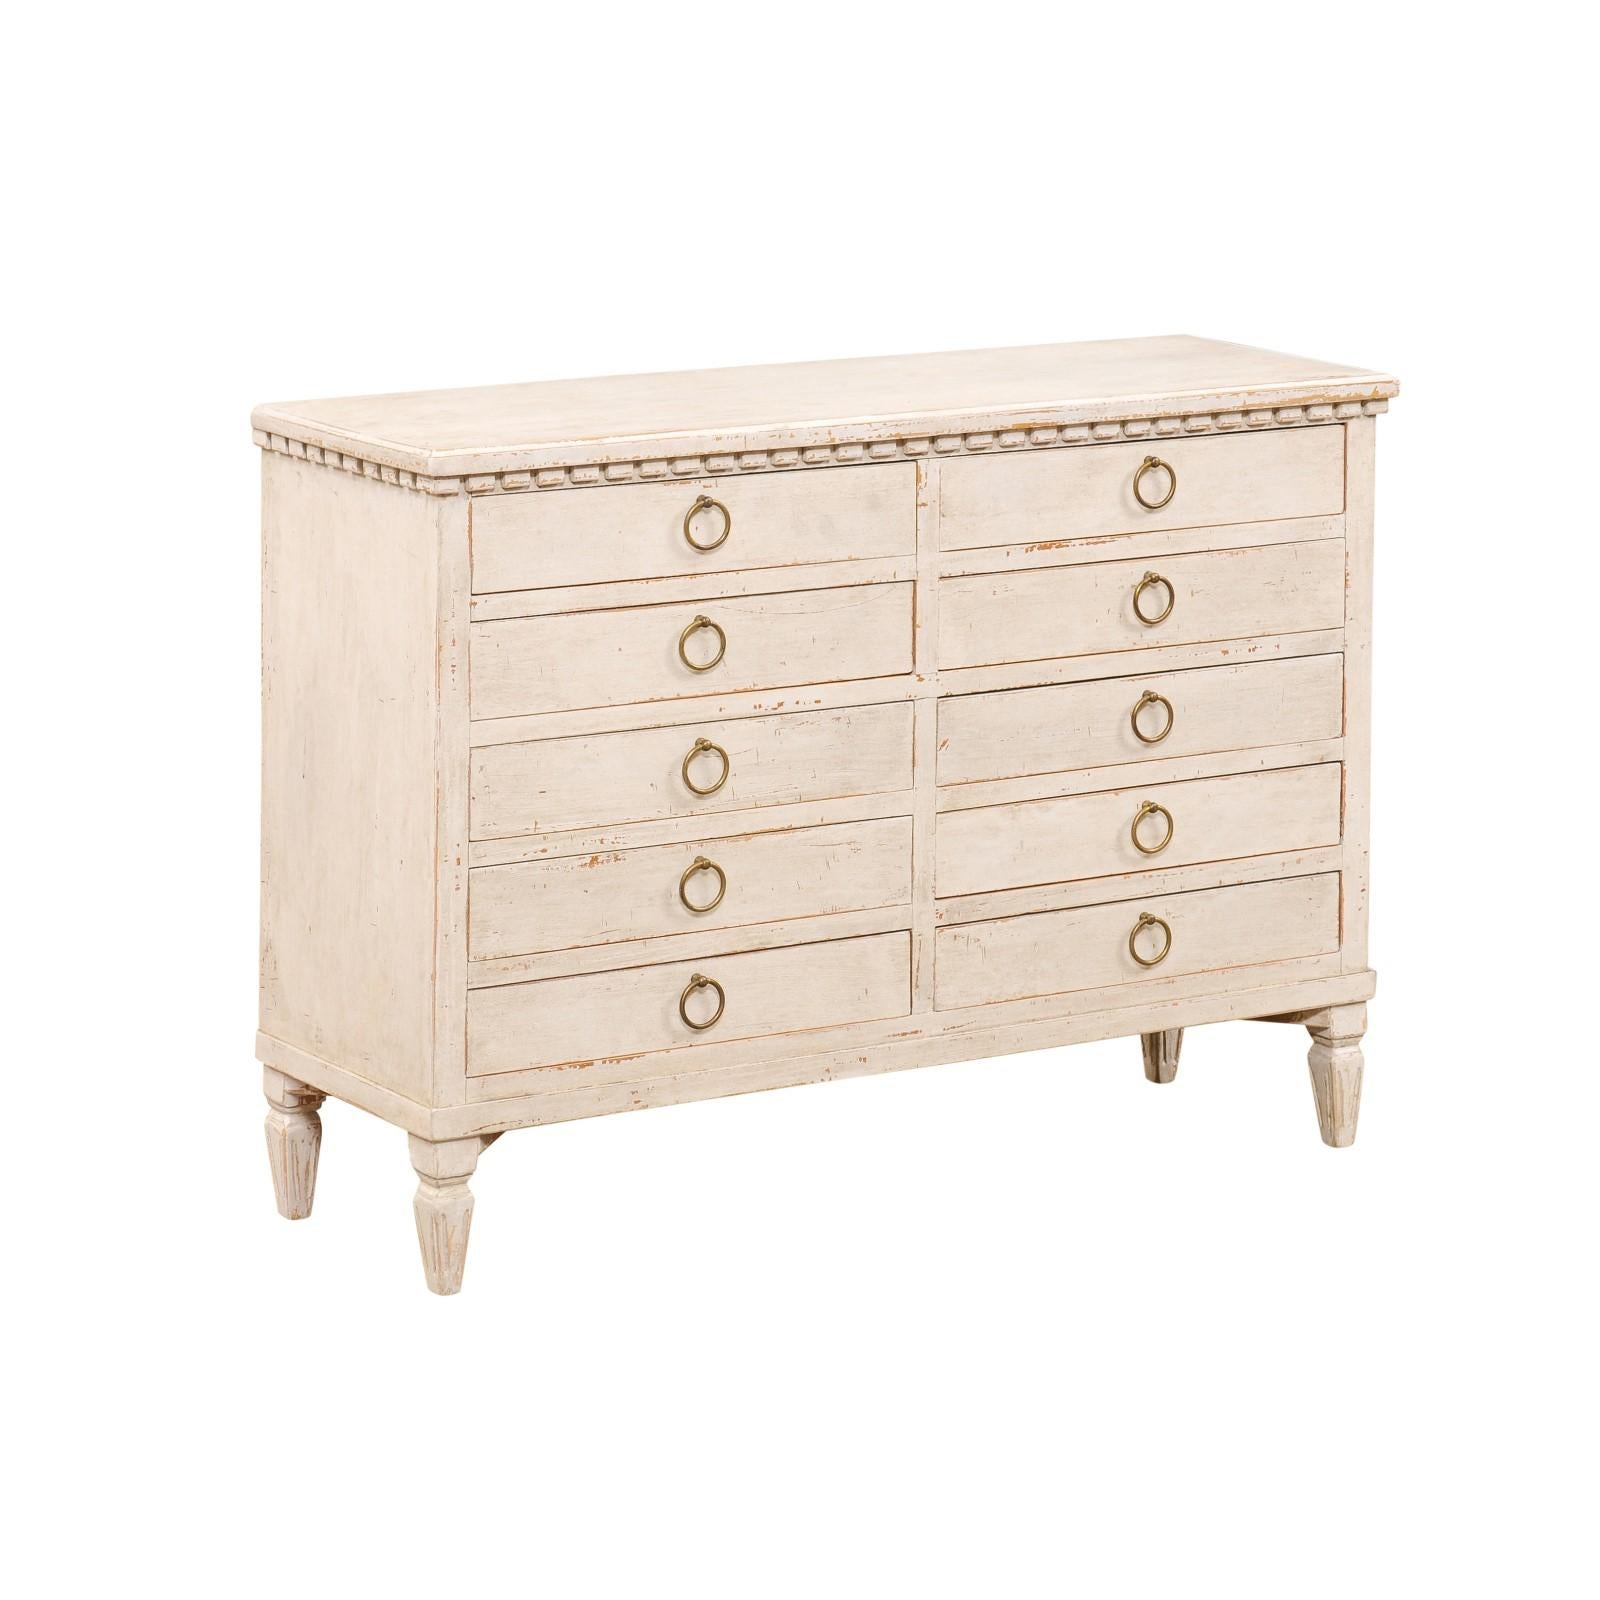 A Swedish Gustavian style painted wood apothecary chest from the late 19th century, with carved dentil molding, 10 drawers, brass ring pull hardware and tapered feet. Created in Sweden during the last decade of the 19th century, this painted chest